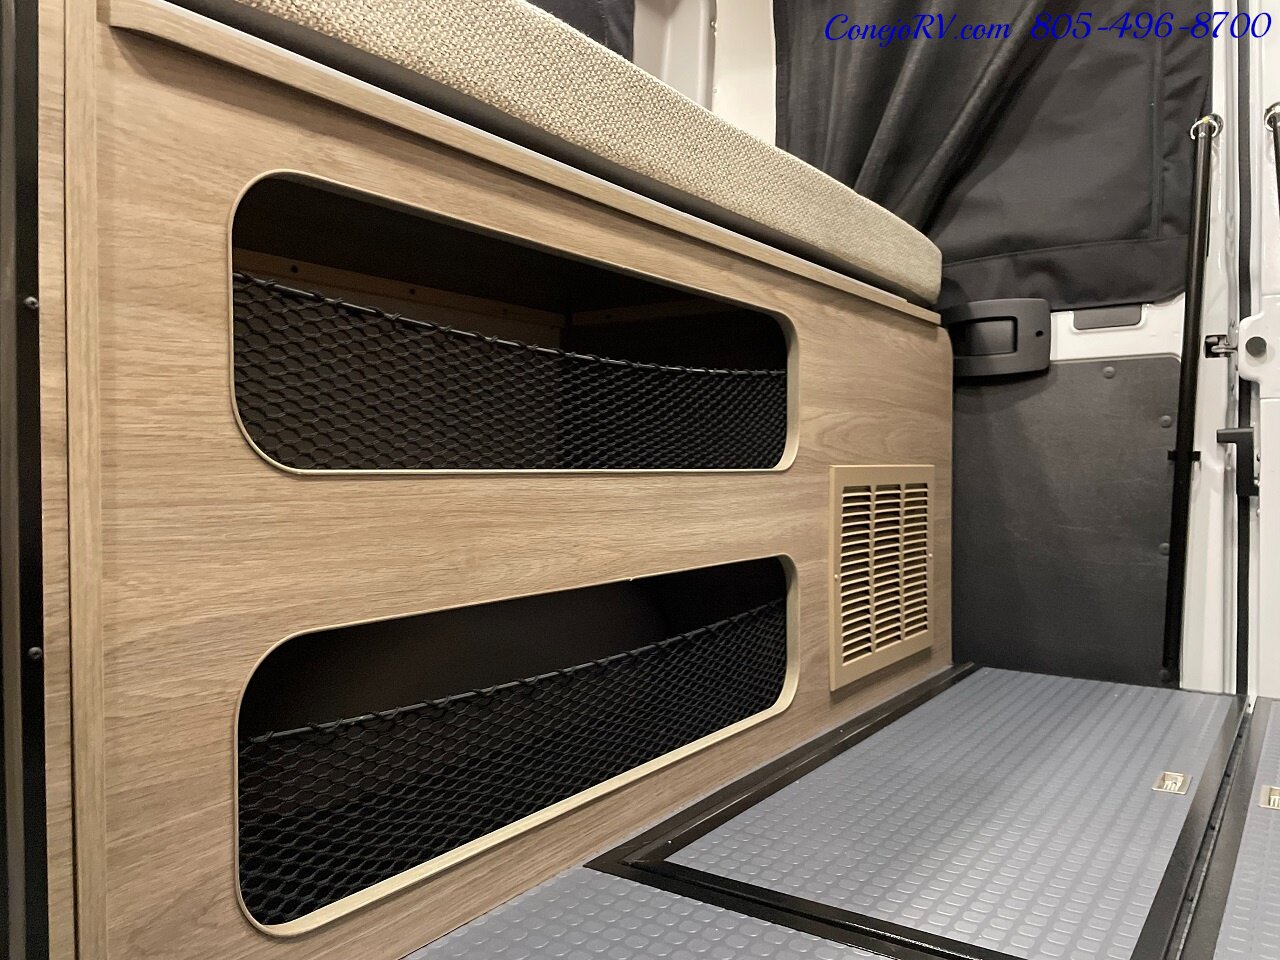 2023 WINNEBAGO Solis 59P Murphy Bed Pop Top Full Galley New Chassis  Adaptive Cruise - Photo 20 - Thousand Oaks, CA 91360